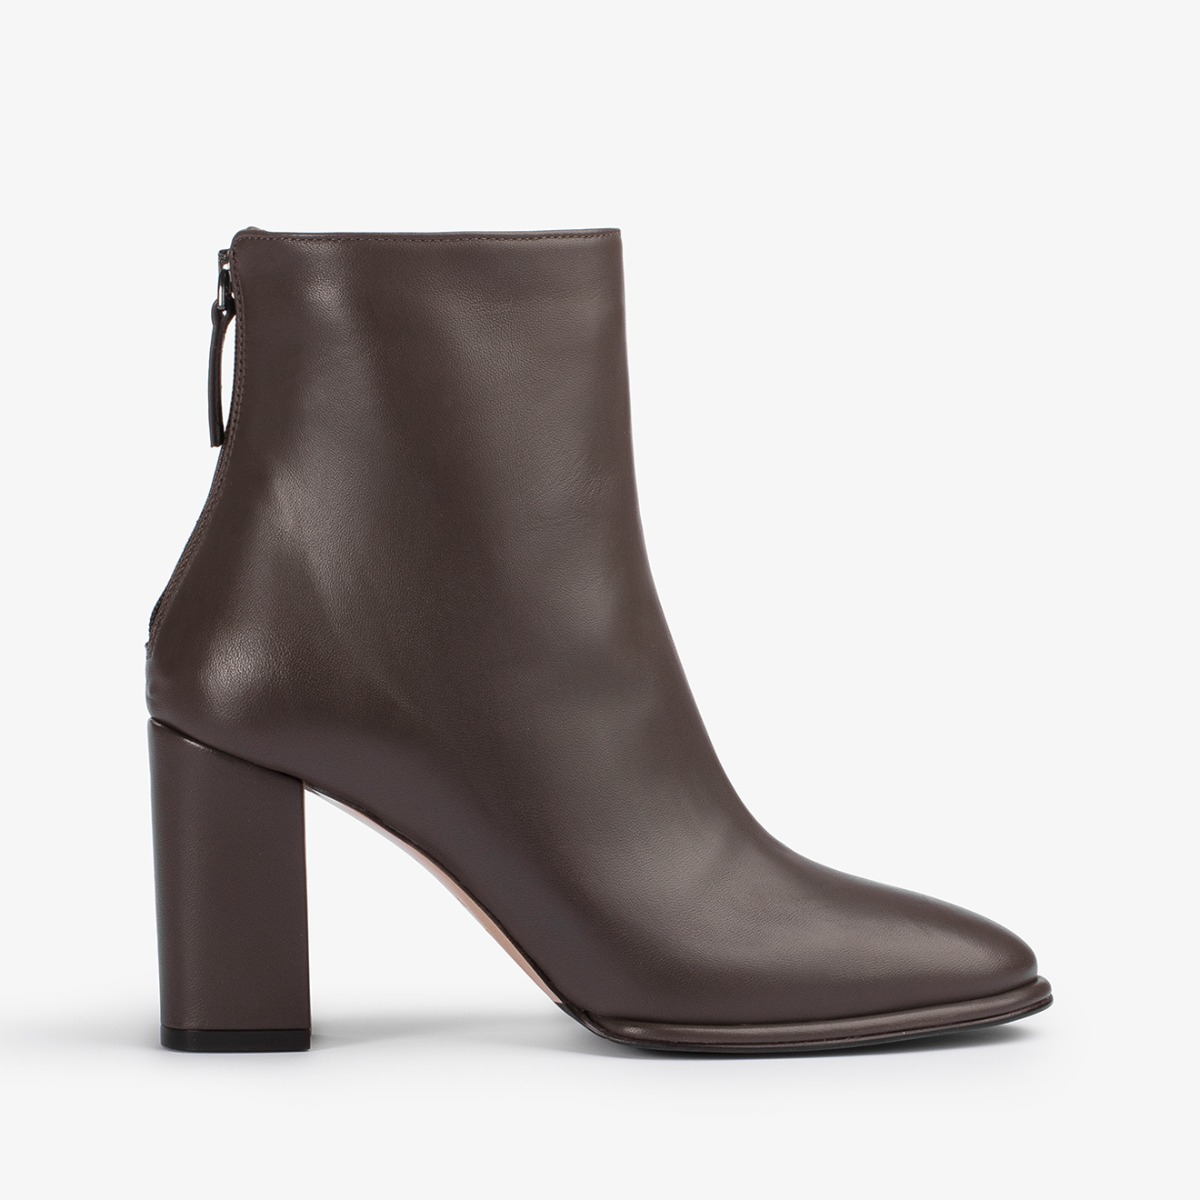 ELSA ANKLE BOOT 80 mm - Le Silla | Official Online Store